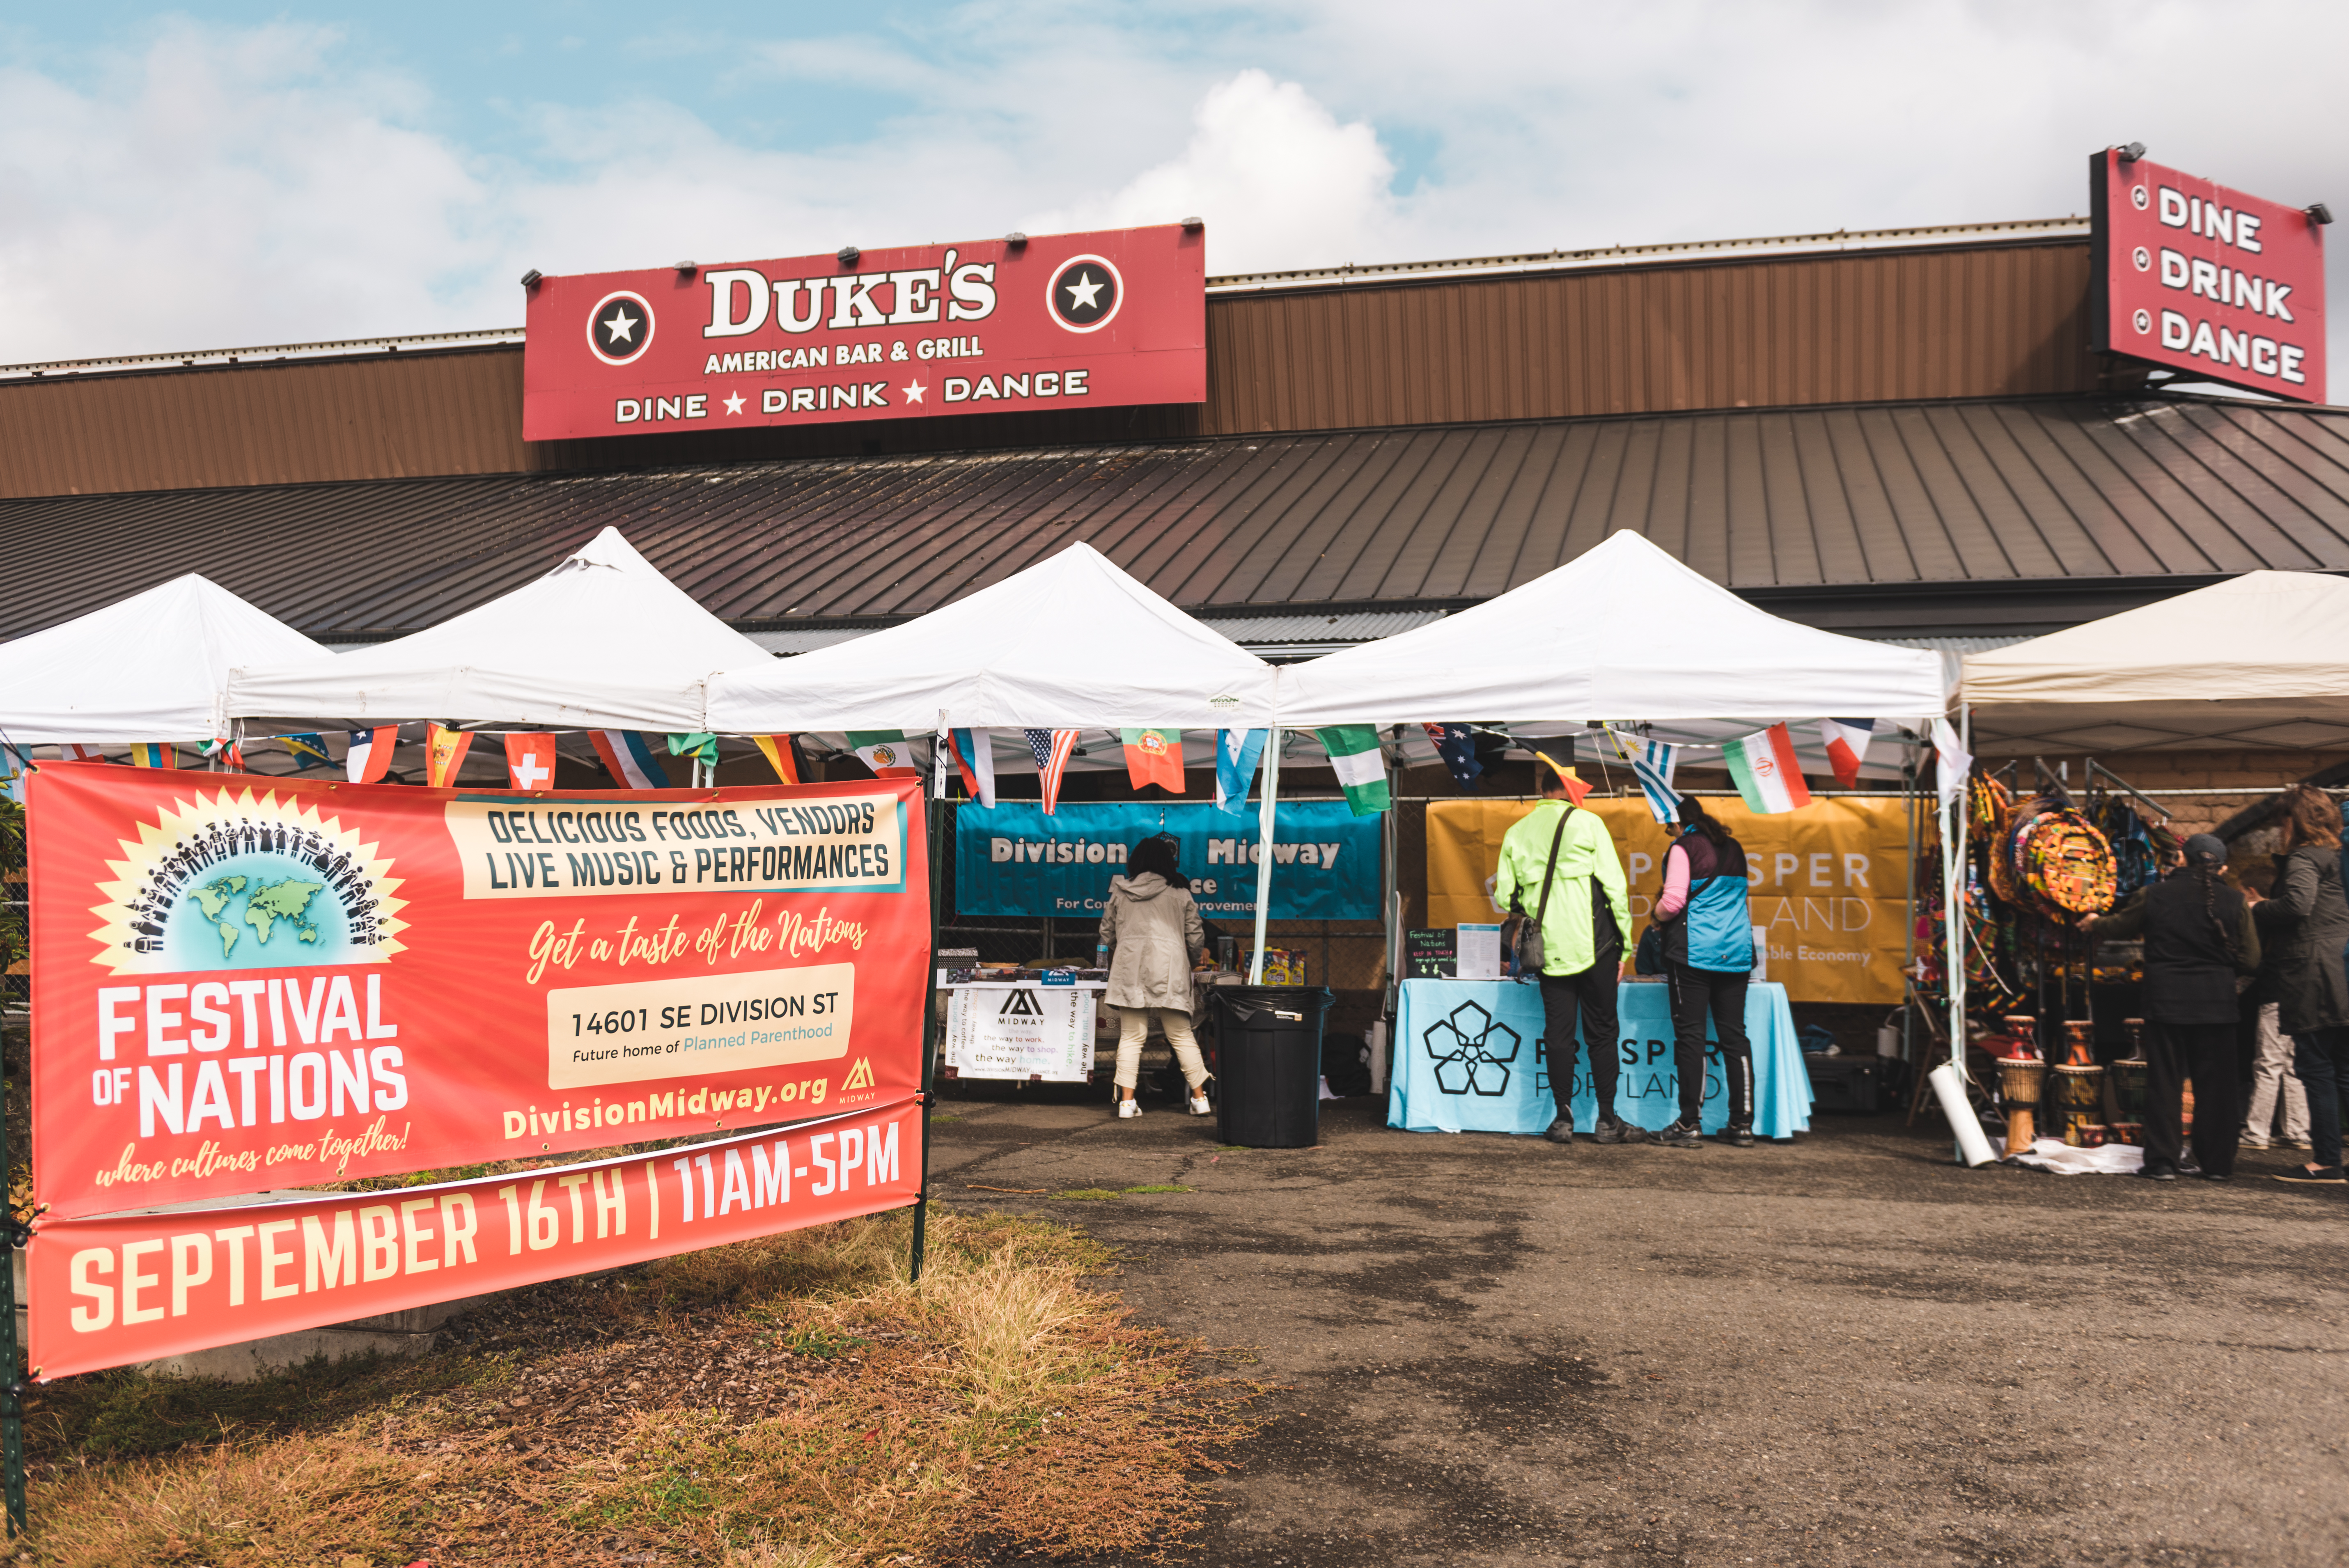 Duke's American Bar & Grill at Festival of nations